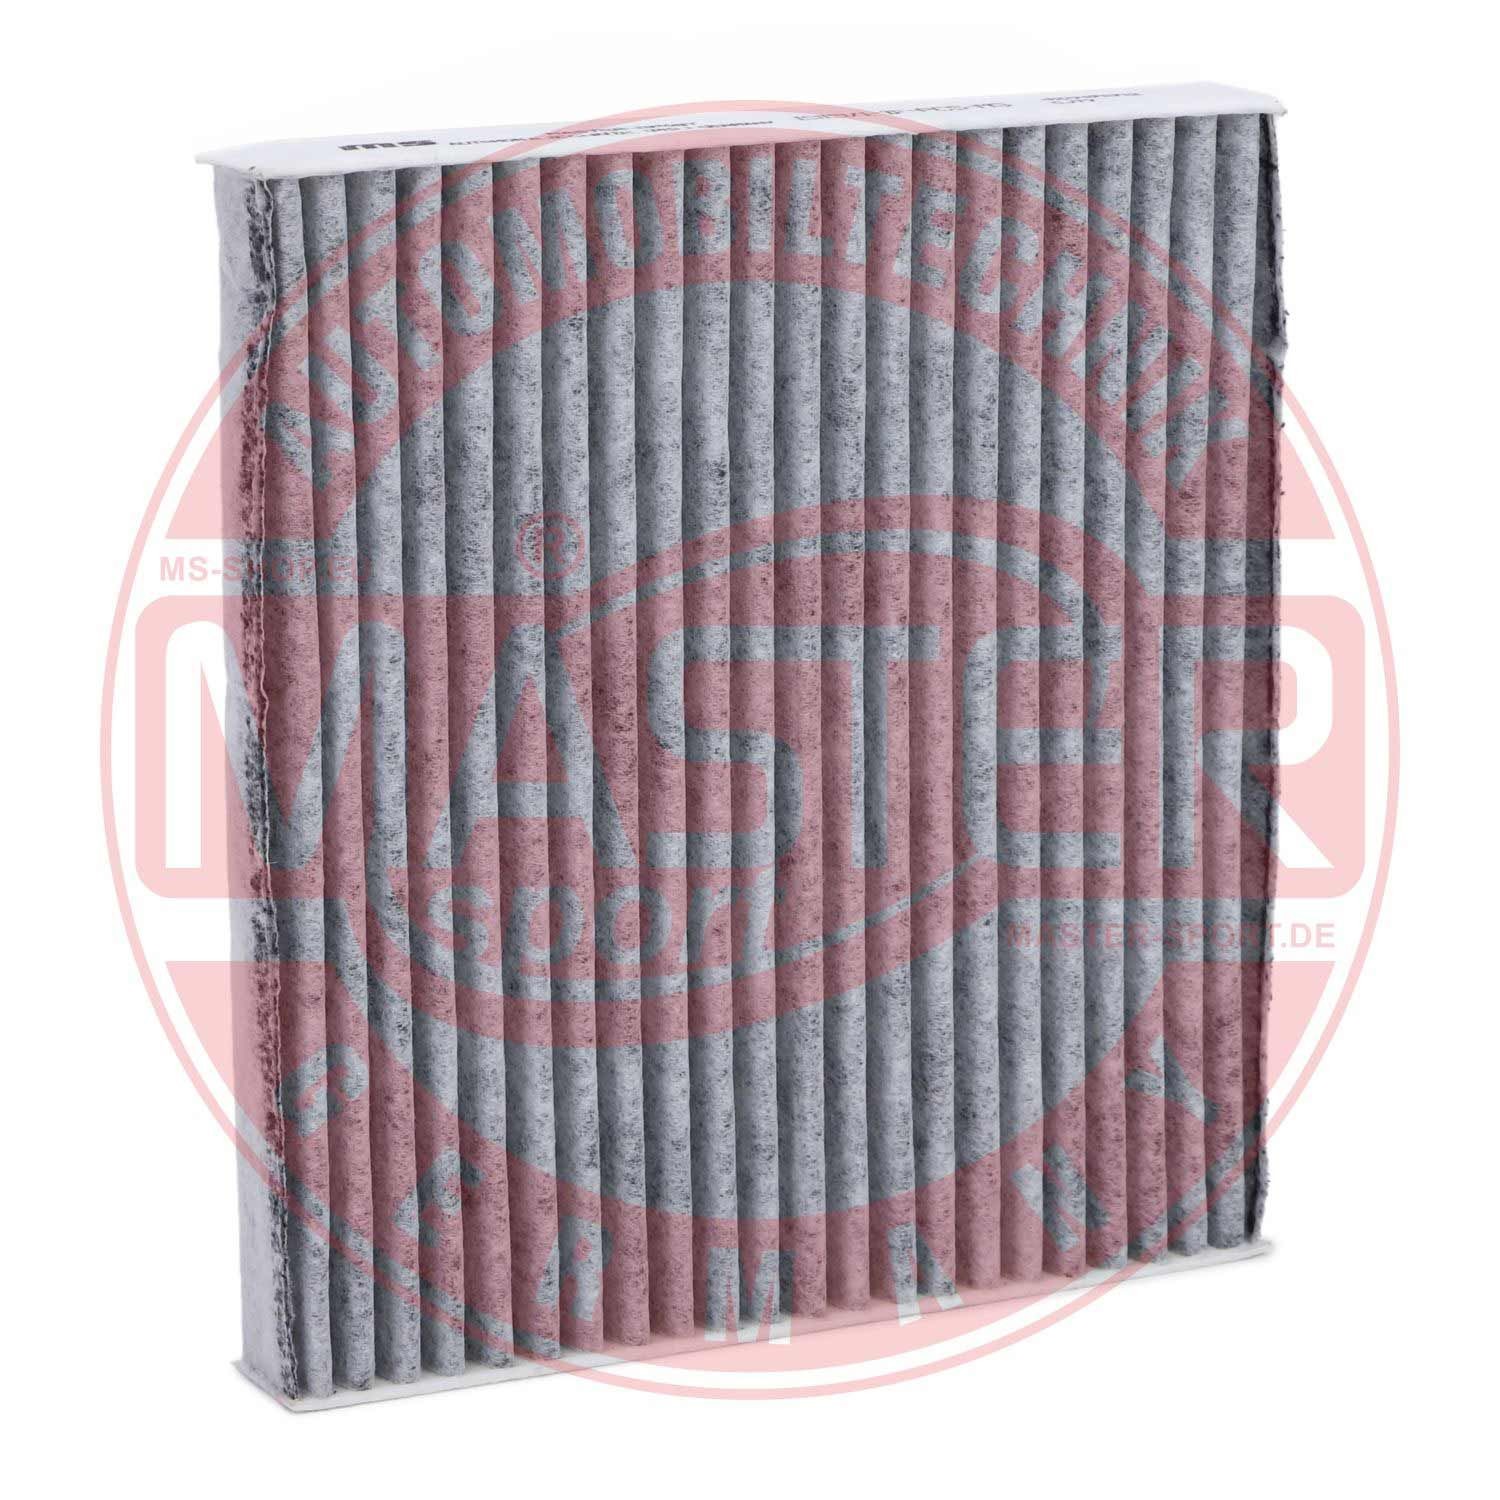 MASTER-SPORT Air conditioning filter 1919/1-IF-PCS-MS